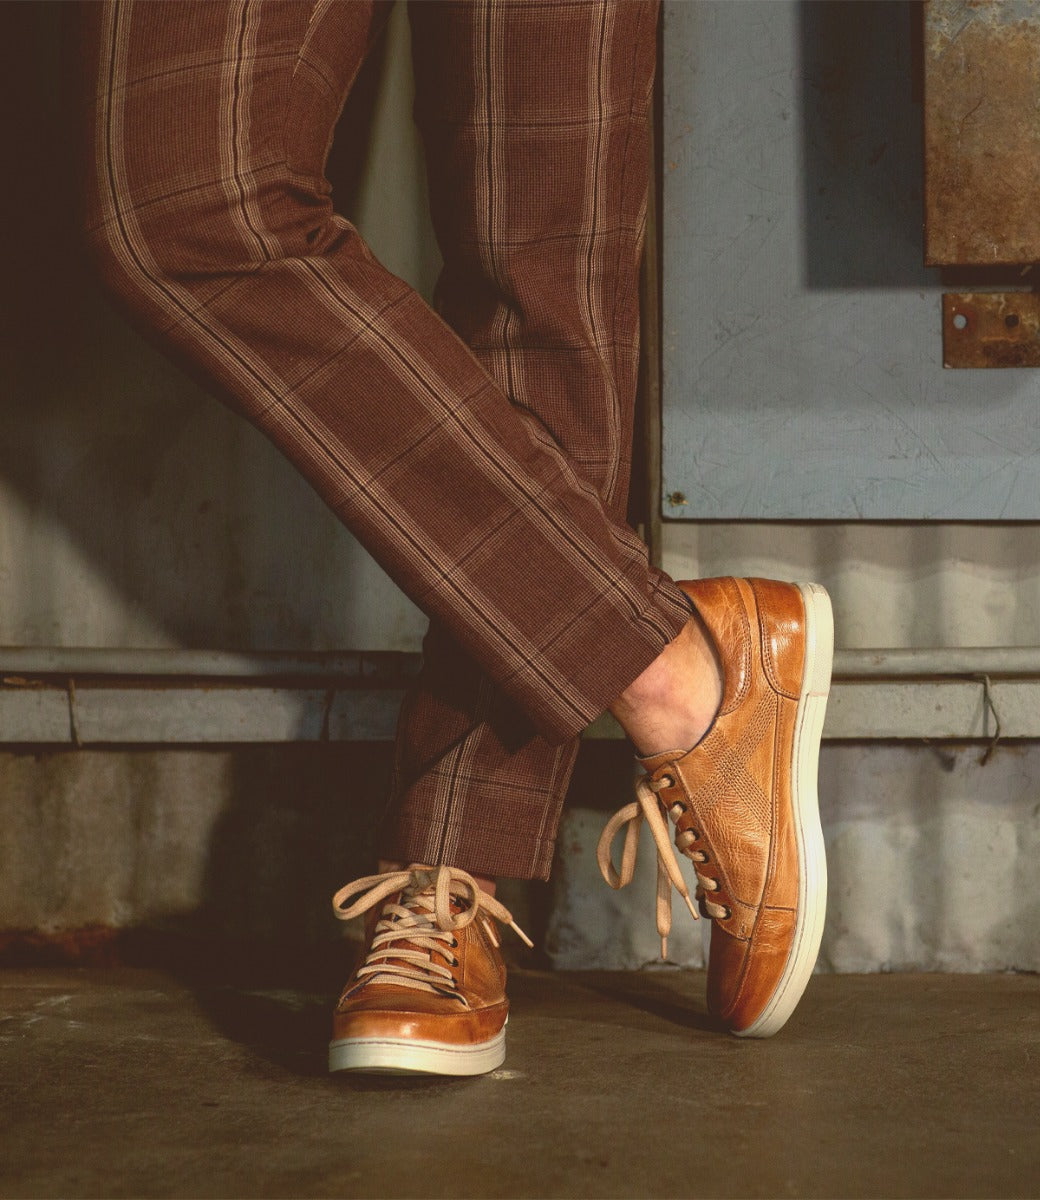 A person wearing brown pants and a pair of Bed Stu Wizard shoes.